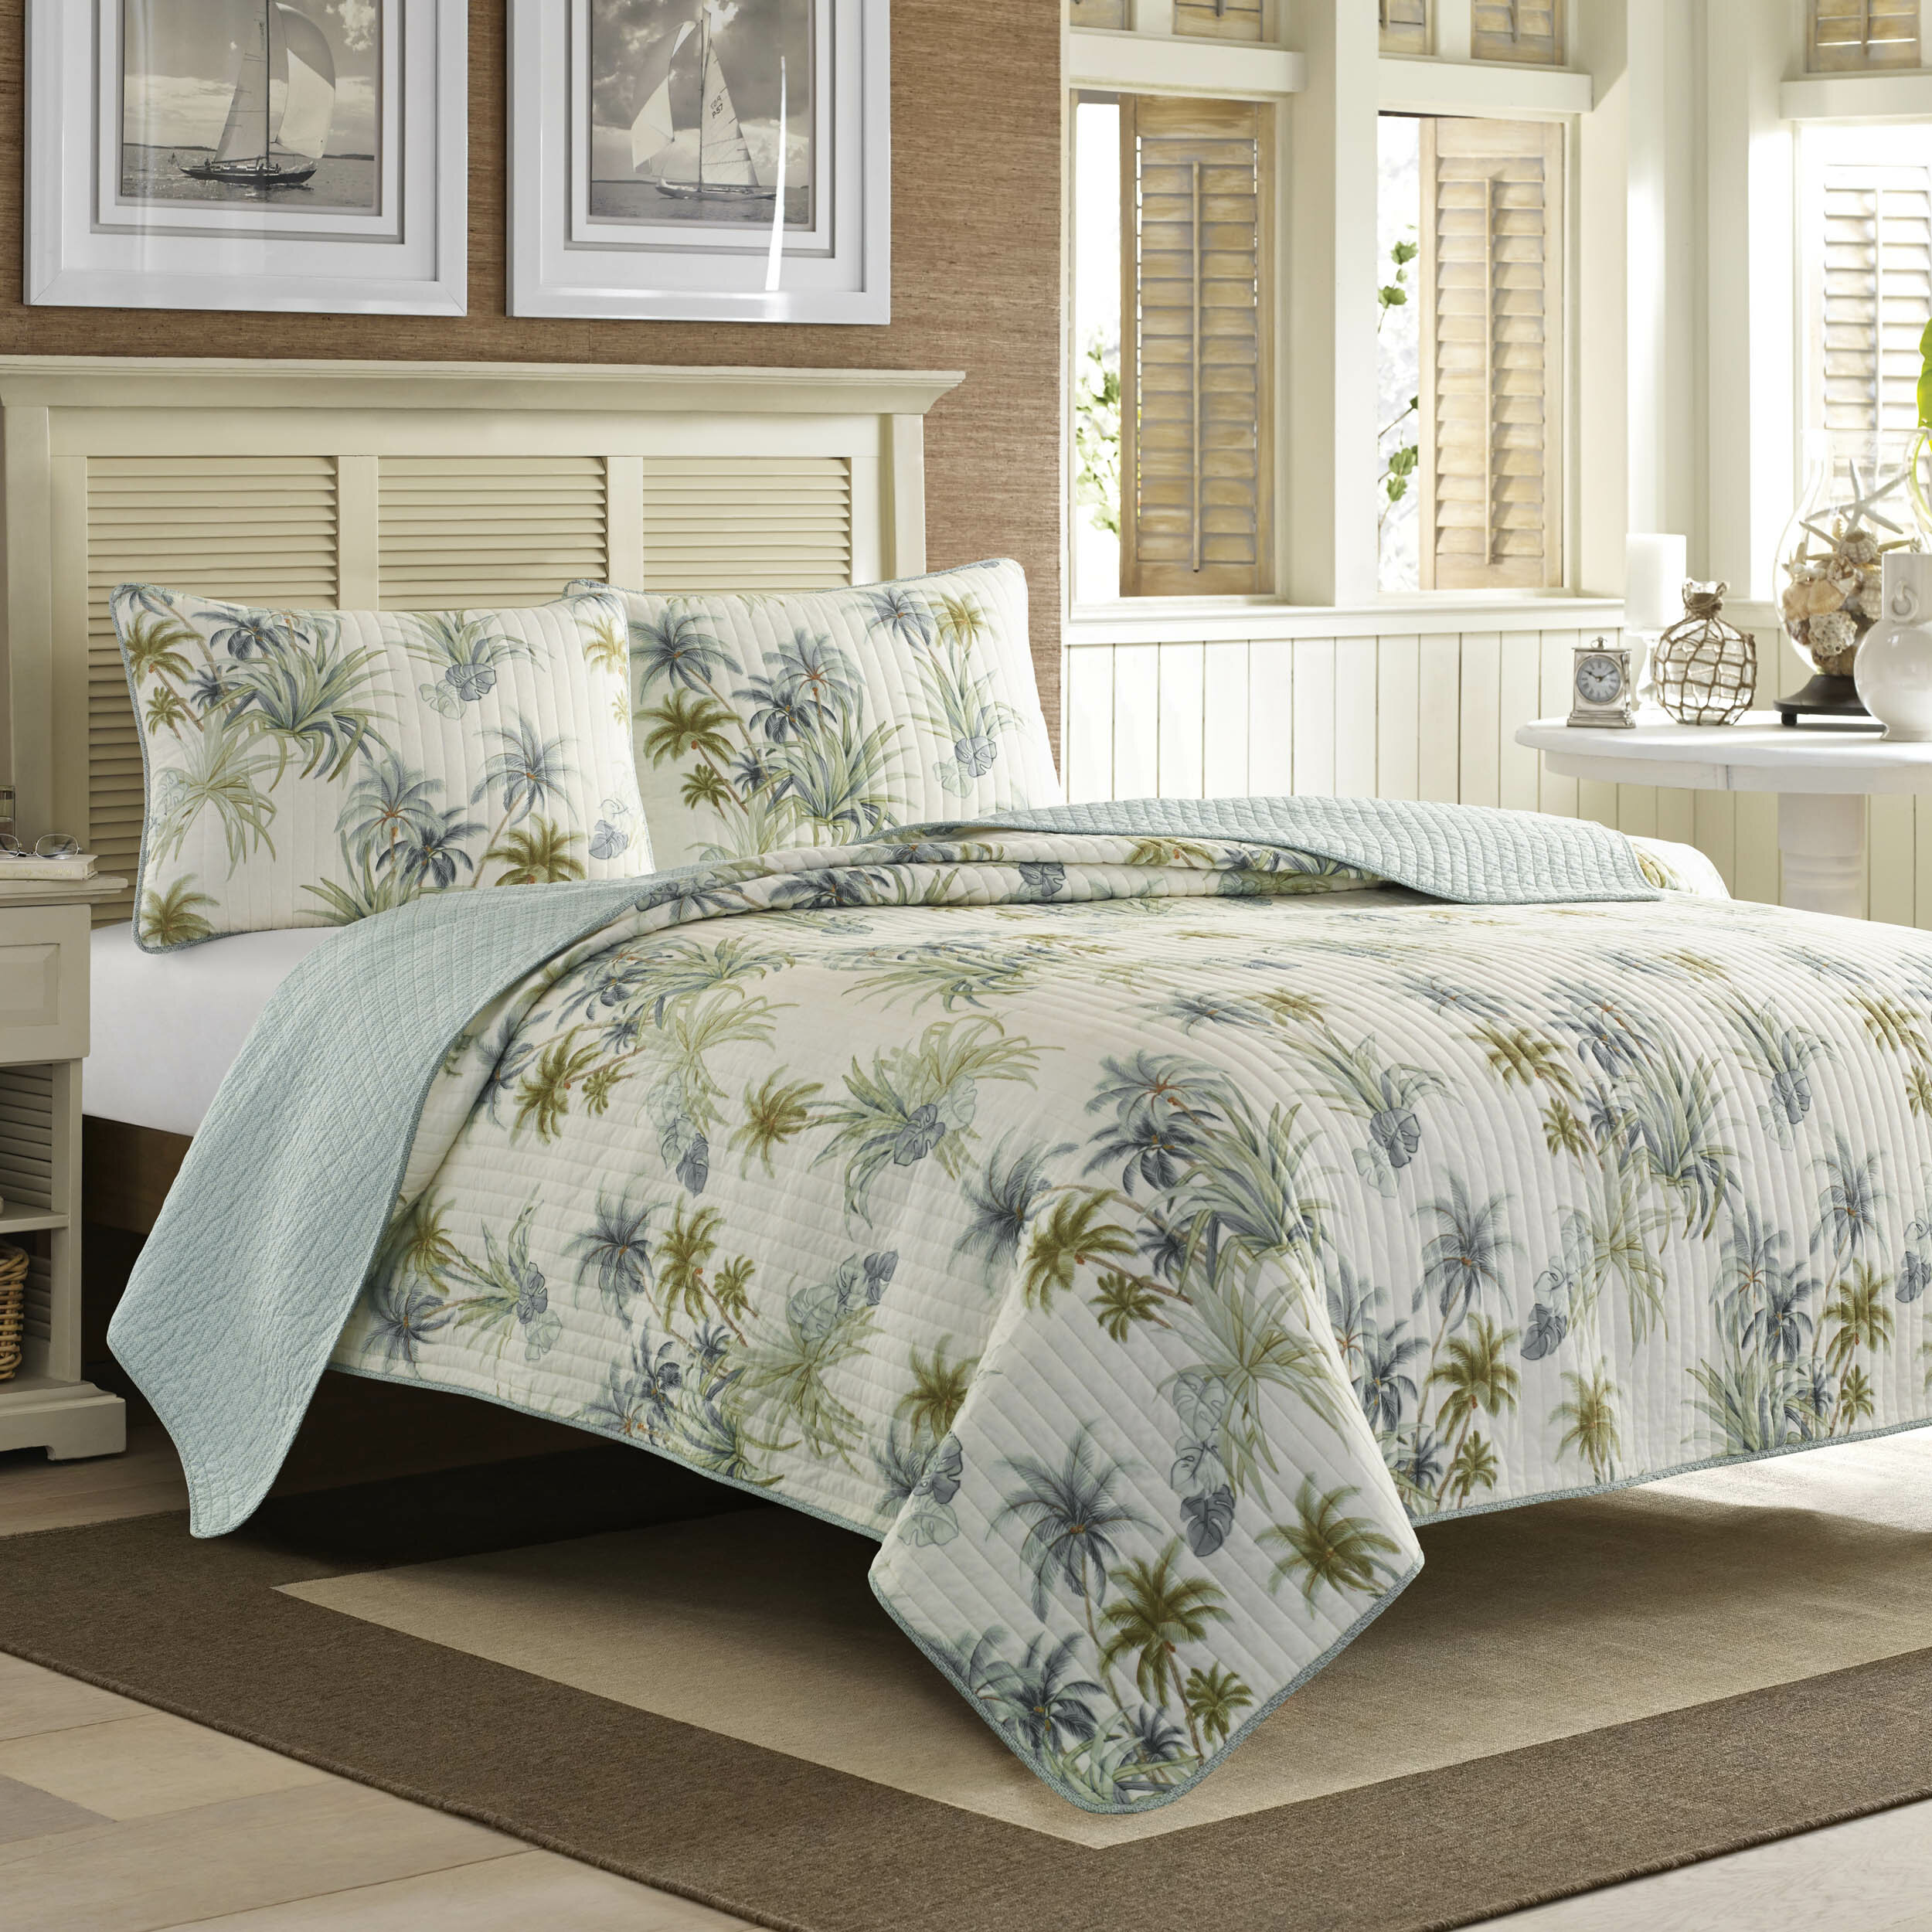 Serenity Palms Quilt By Tommy Bahama Bedding Reviews Joss Main